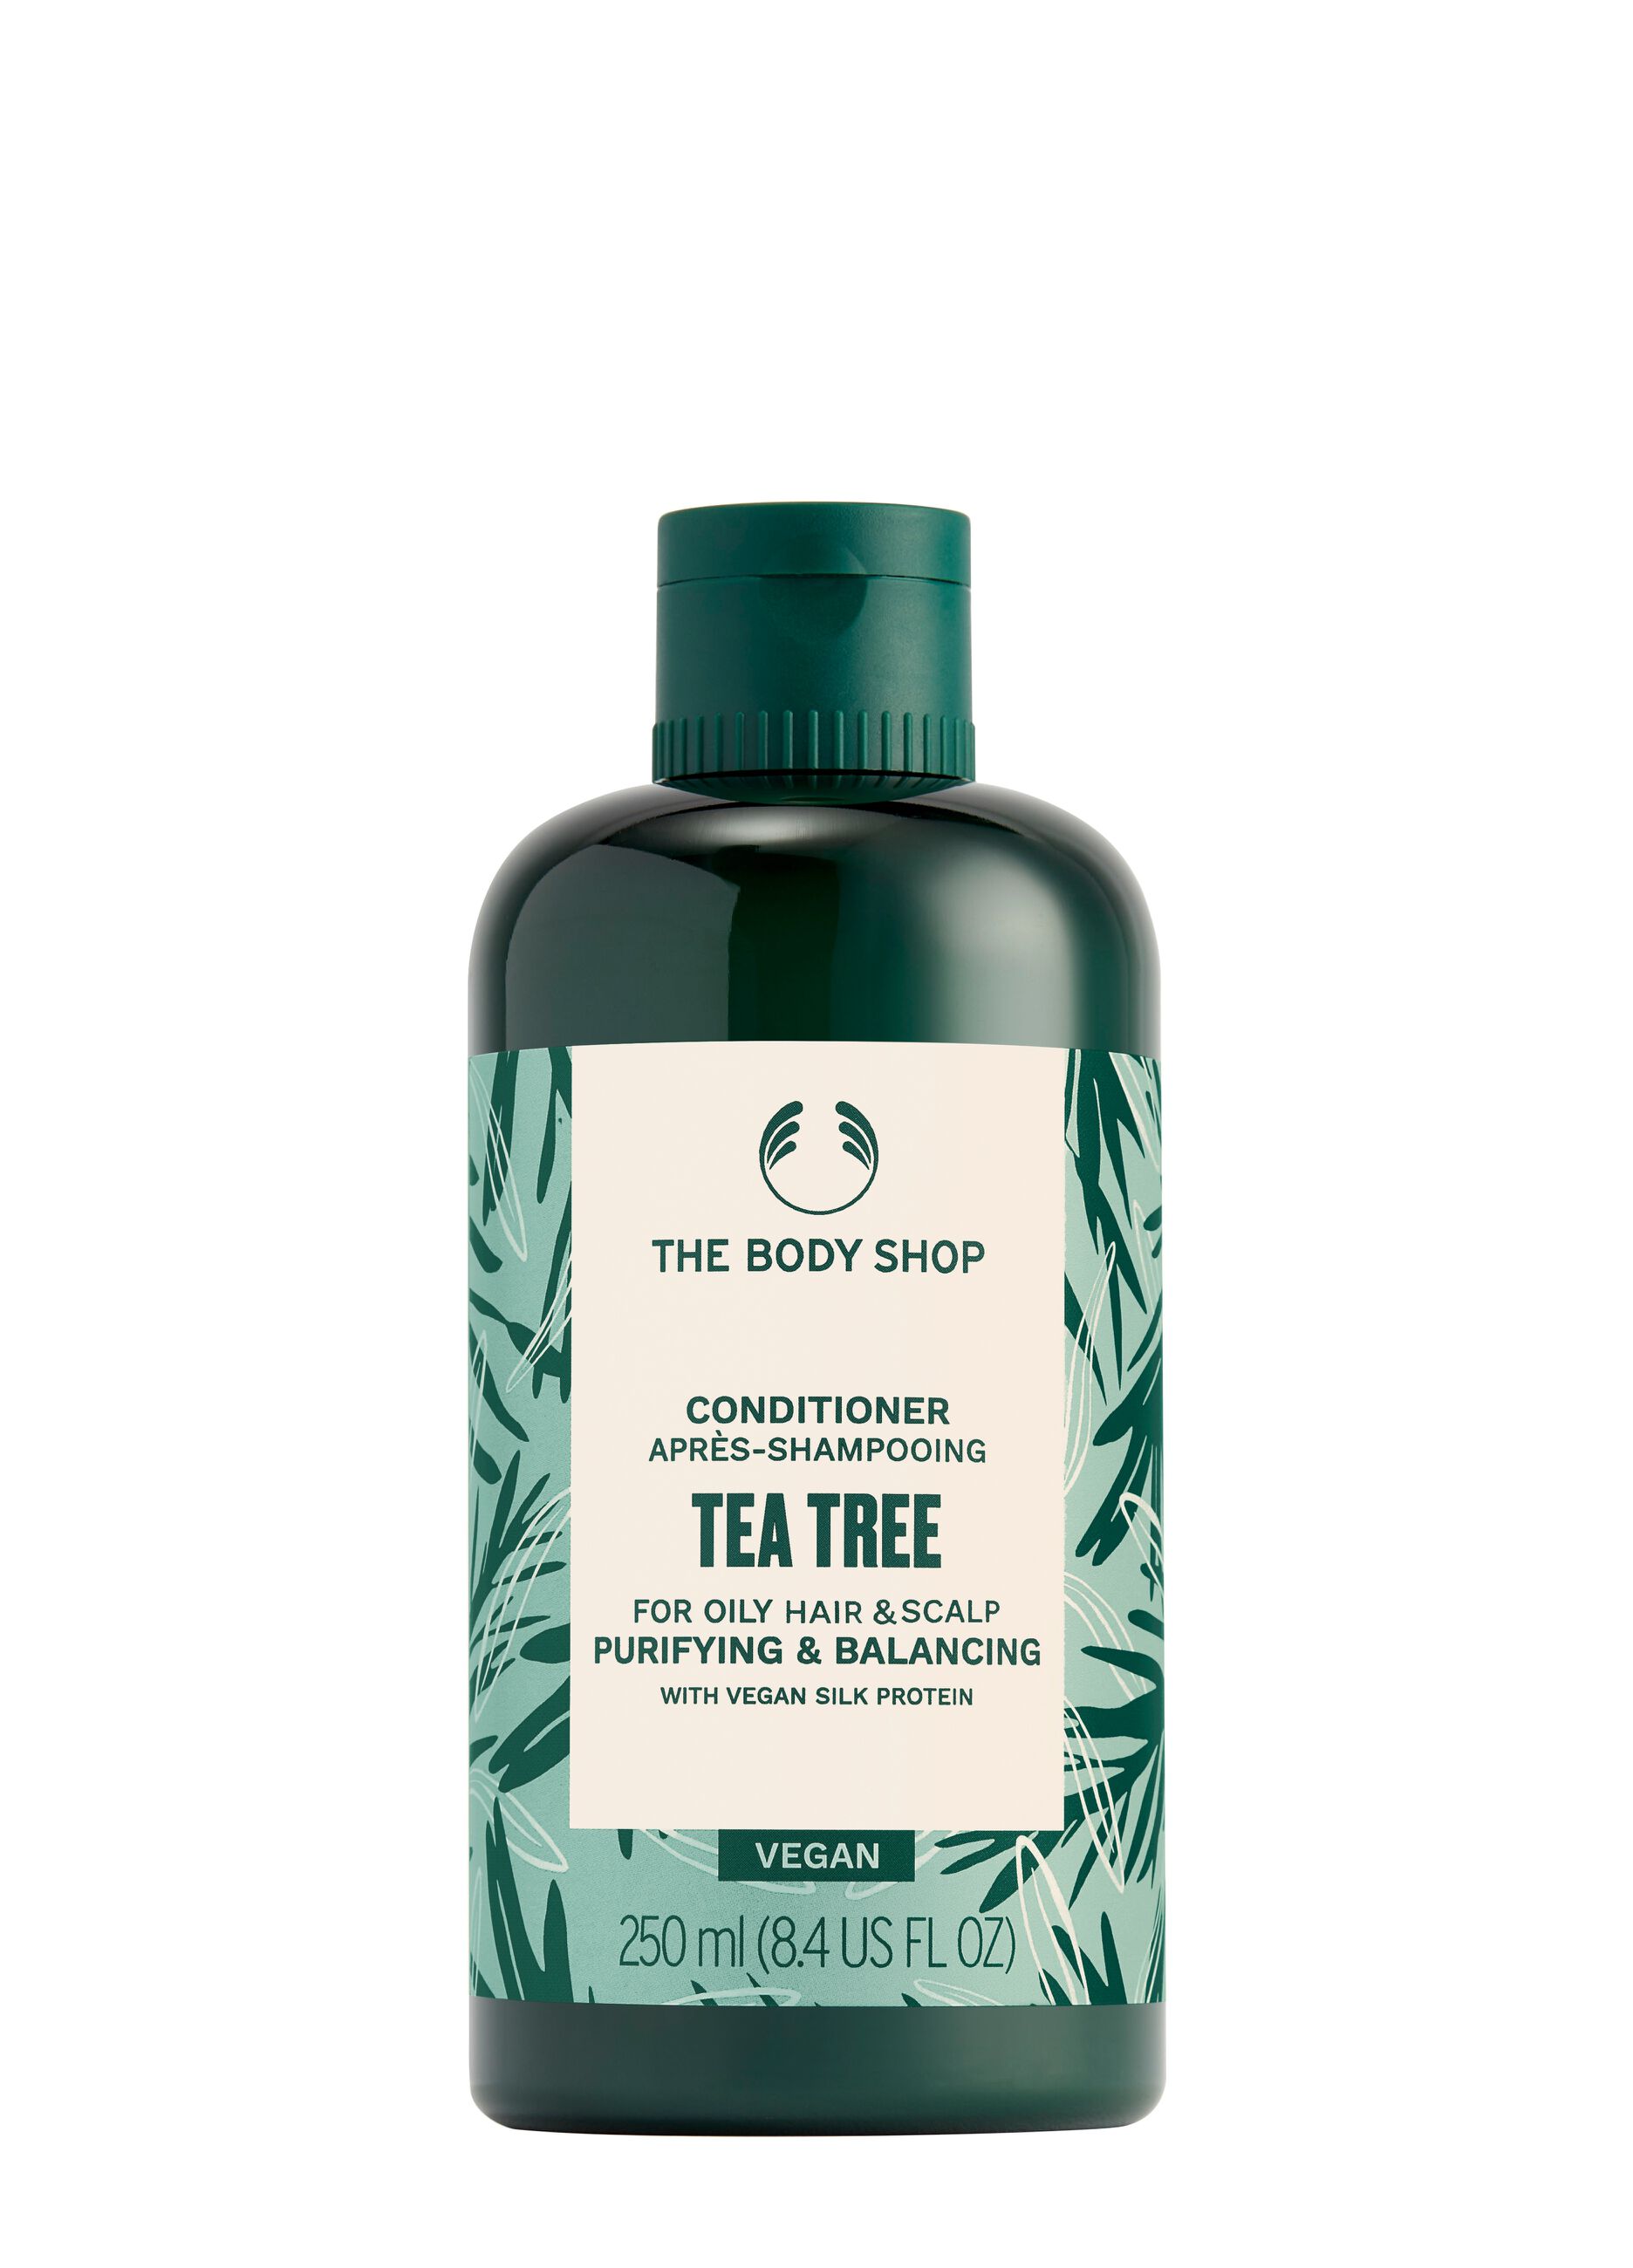 The Body Shop Tea Tree purifying conditioner